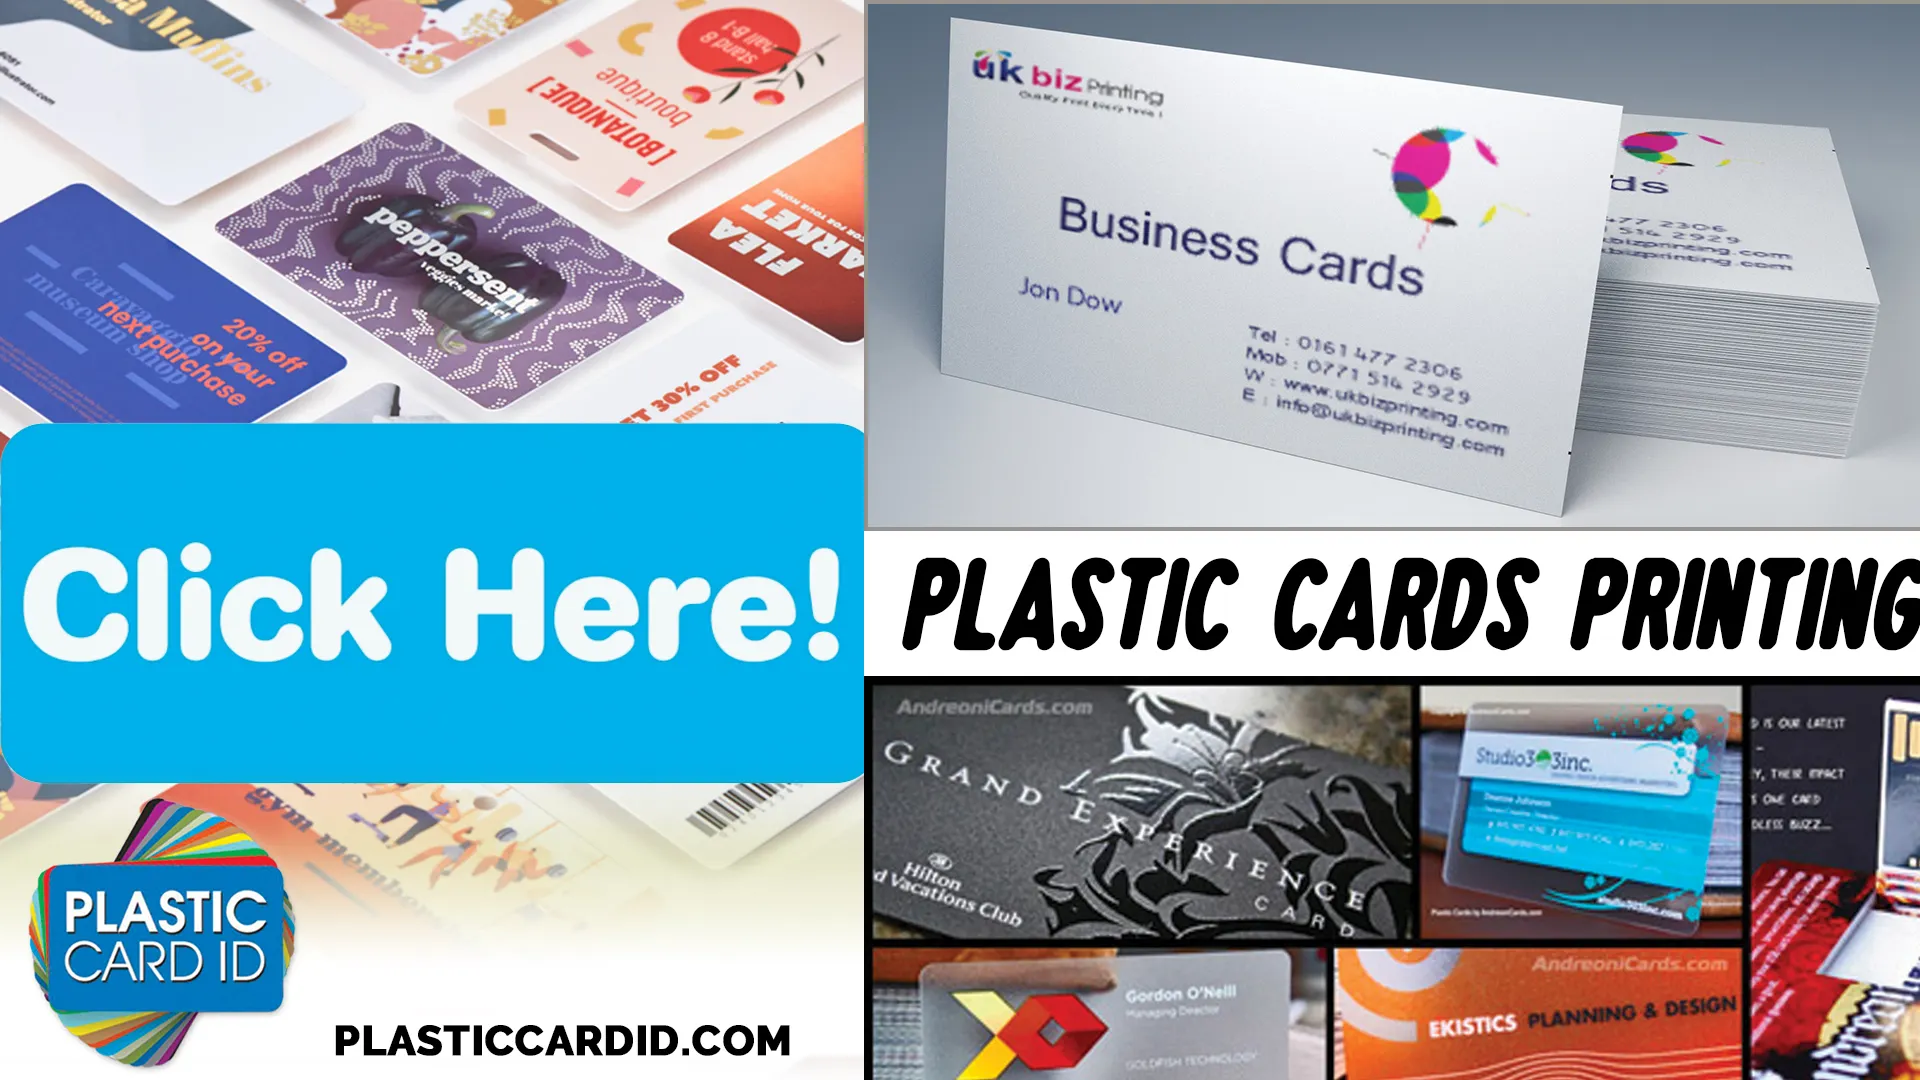 Catering to Varied Industries with Specialty Card Printing